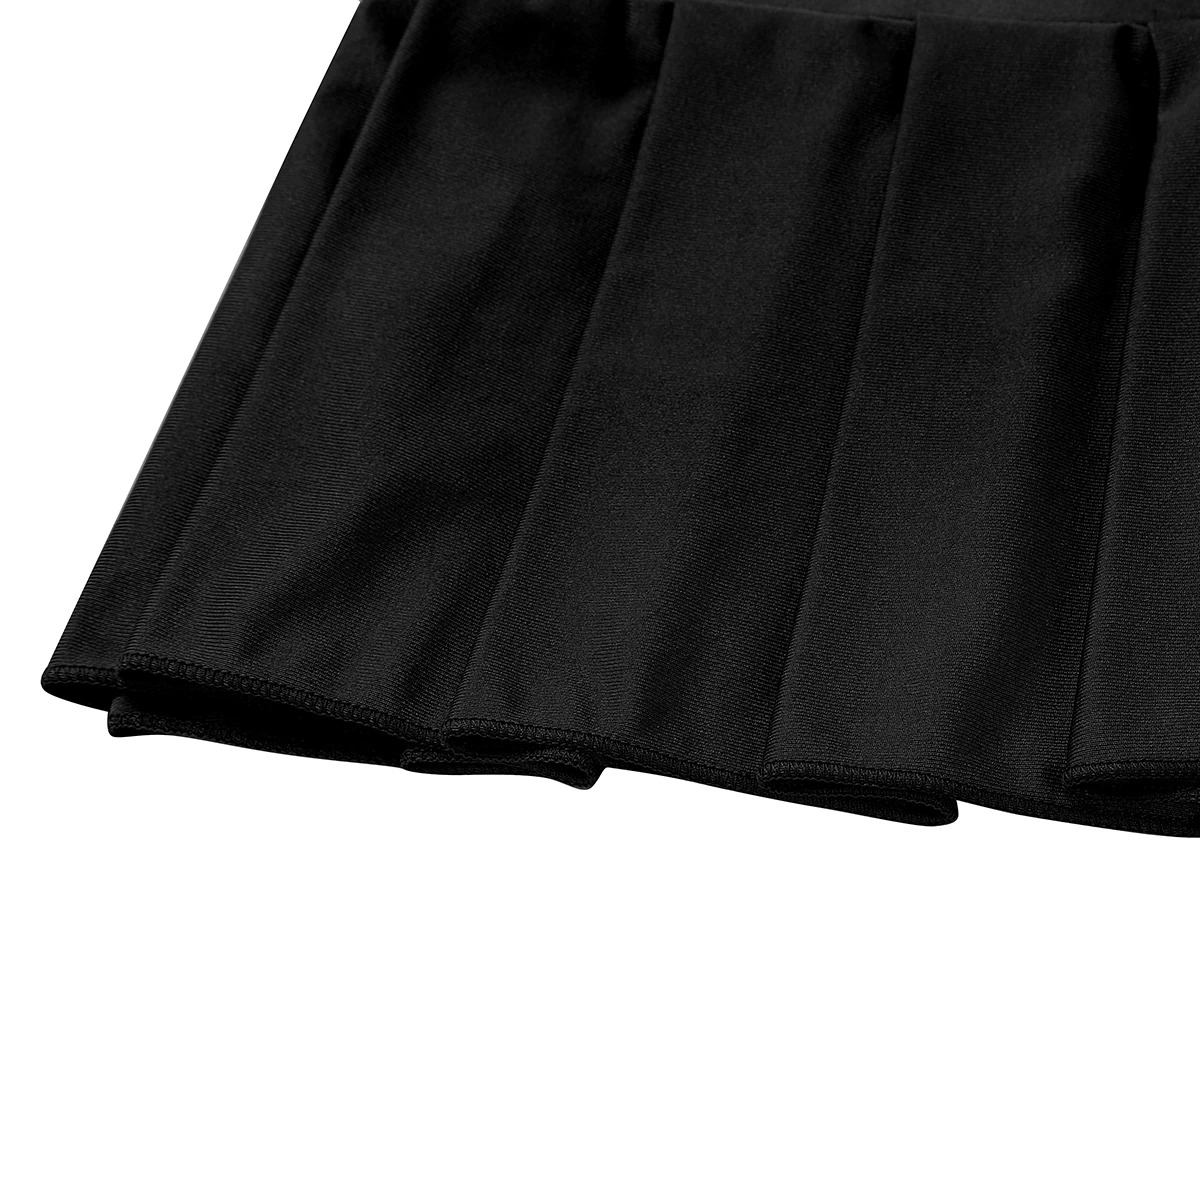 Women's Sexy Cheerleader Mini Skirts / Pleated Low Rise Skirts in Different Colors - EVE's SECRETS